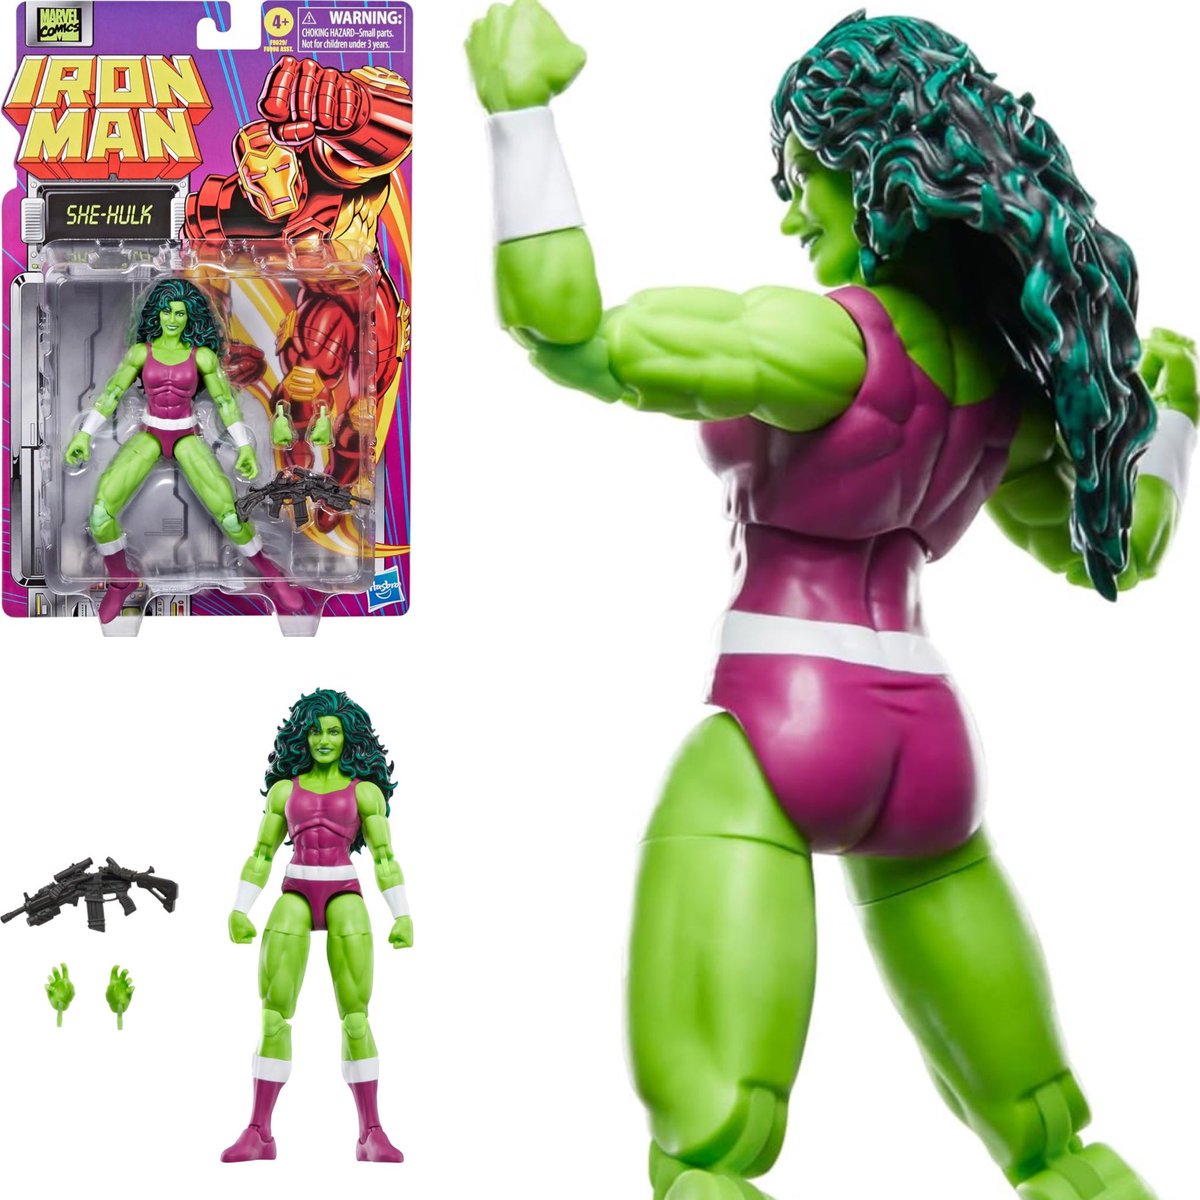 ⚖️💥LAW OFFICES OF MAY 1ST💥⚖️

#PAIDLINK The new #MarvelLegends She-Hulk is now showing a May 1st release on Amazon — preorder at the #AmazonAffiliate link in below! Thanks to @MCUcollector24 for the heads up!

amzn.to/44pTXLa

#marvel #marvelcomics #shehulk #hasbropulse